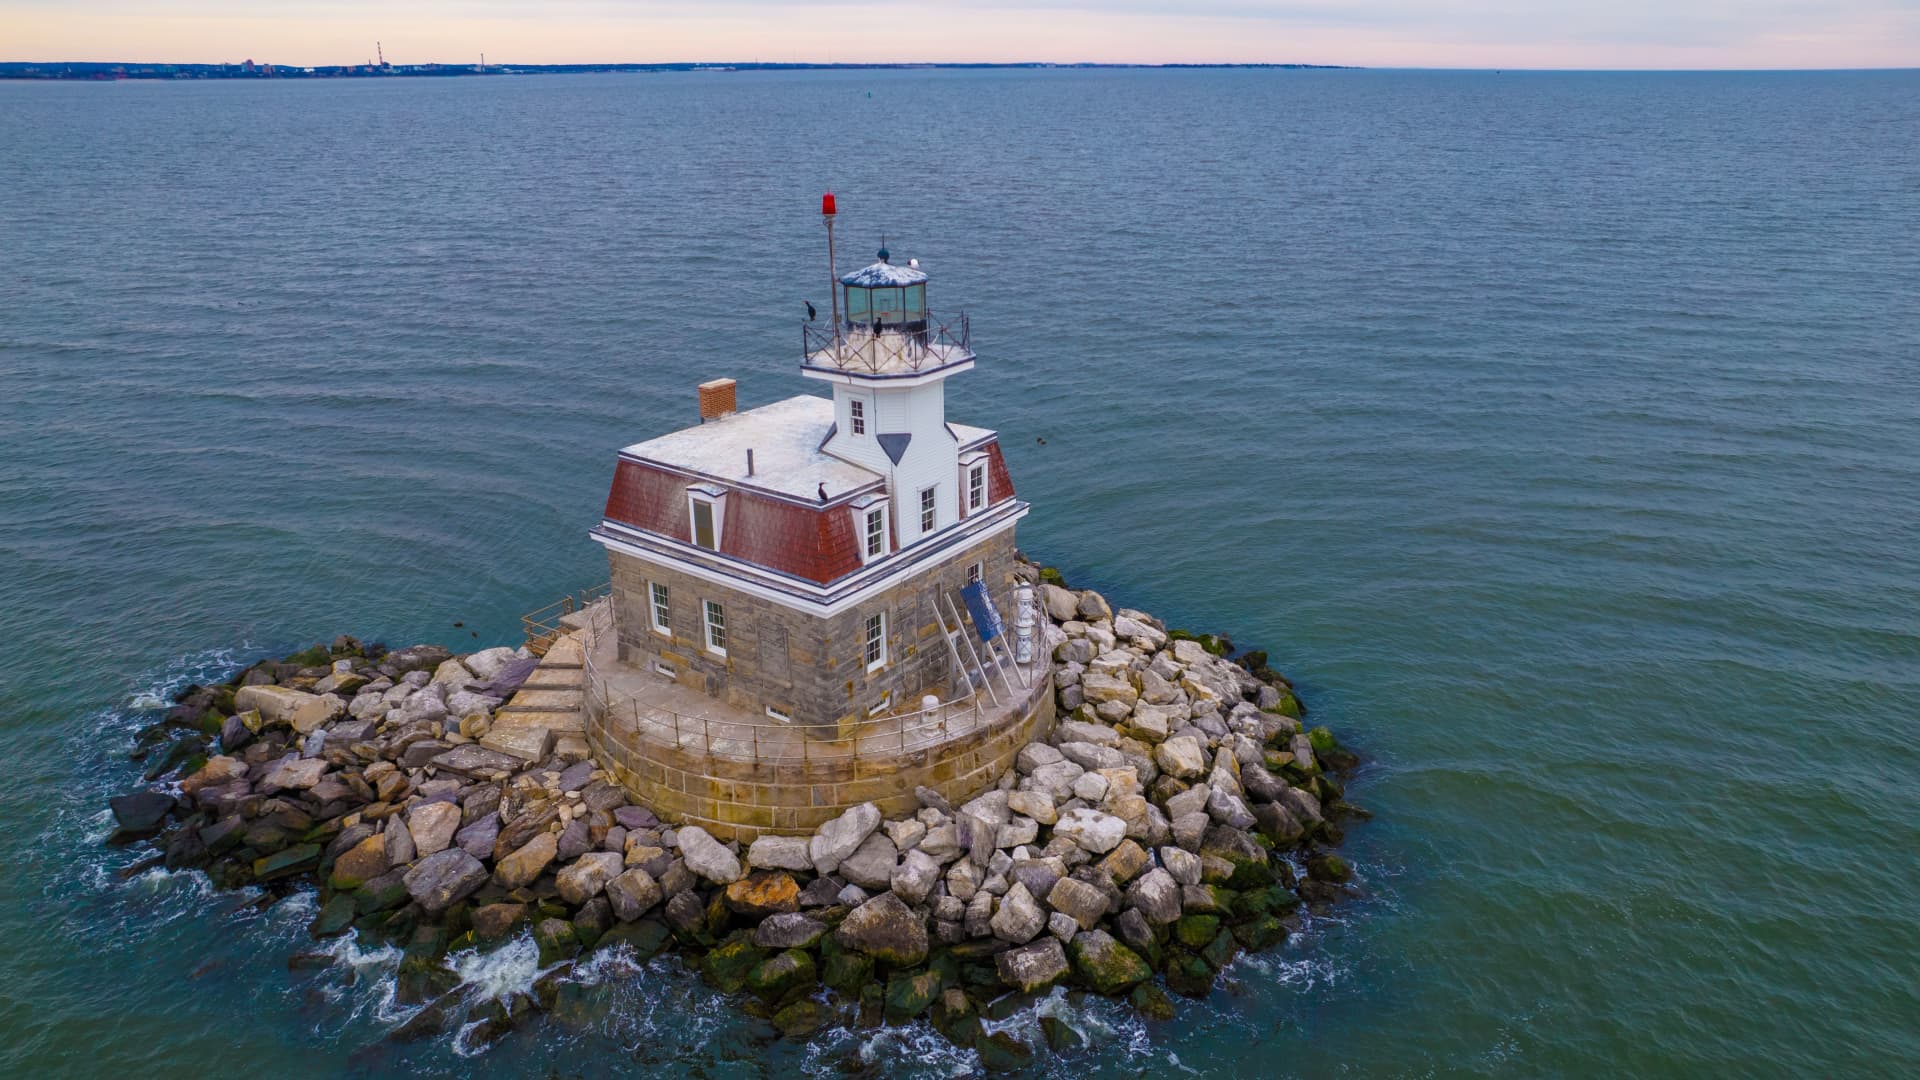 The Penfield Reef Lighthouse in Fairfield, Connecticut is being auctioned off.